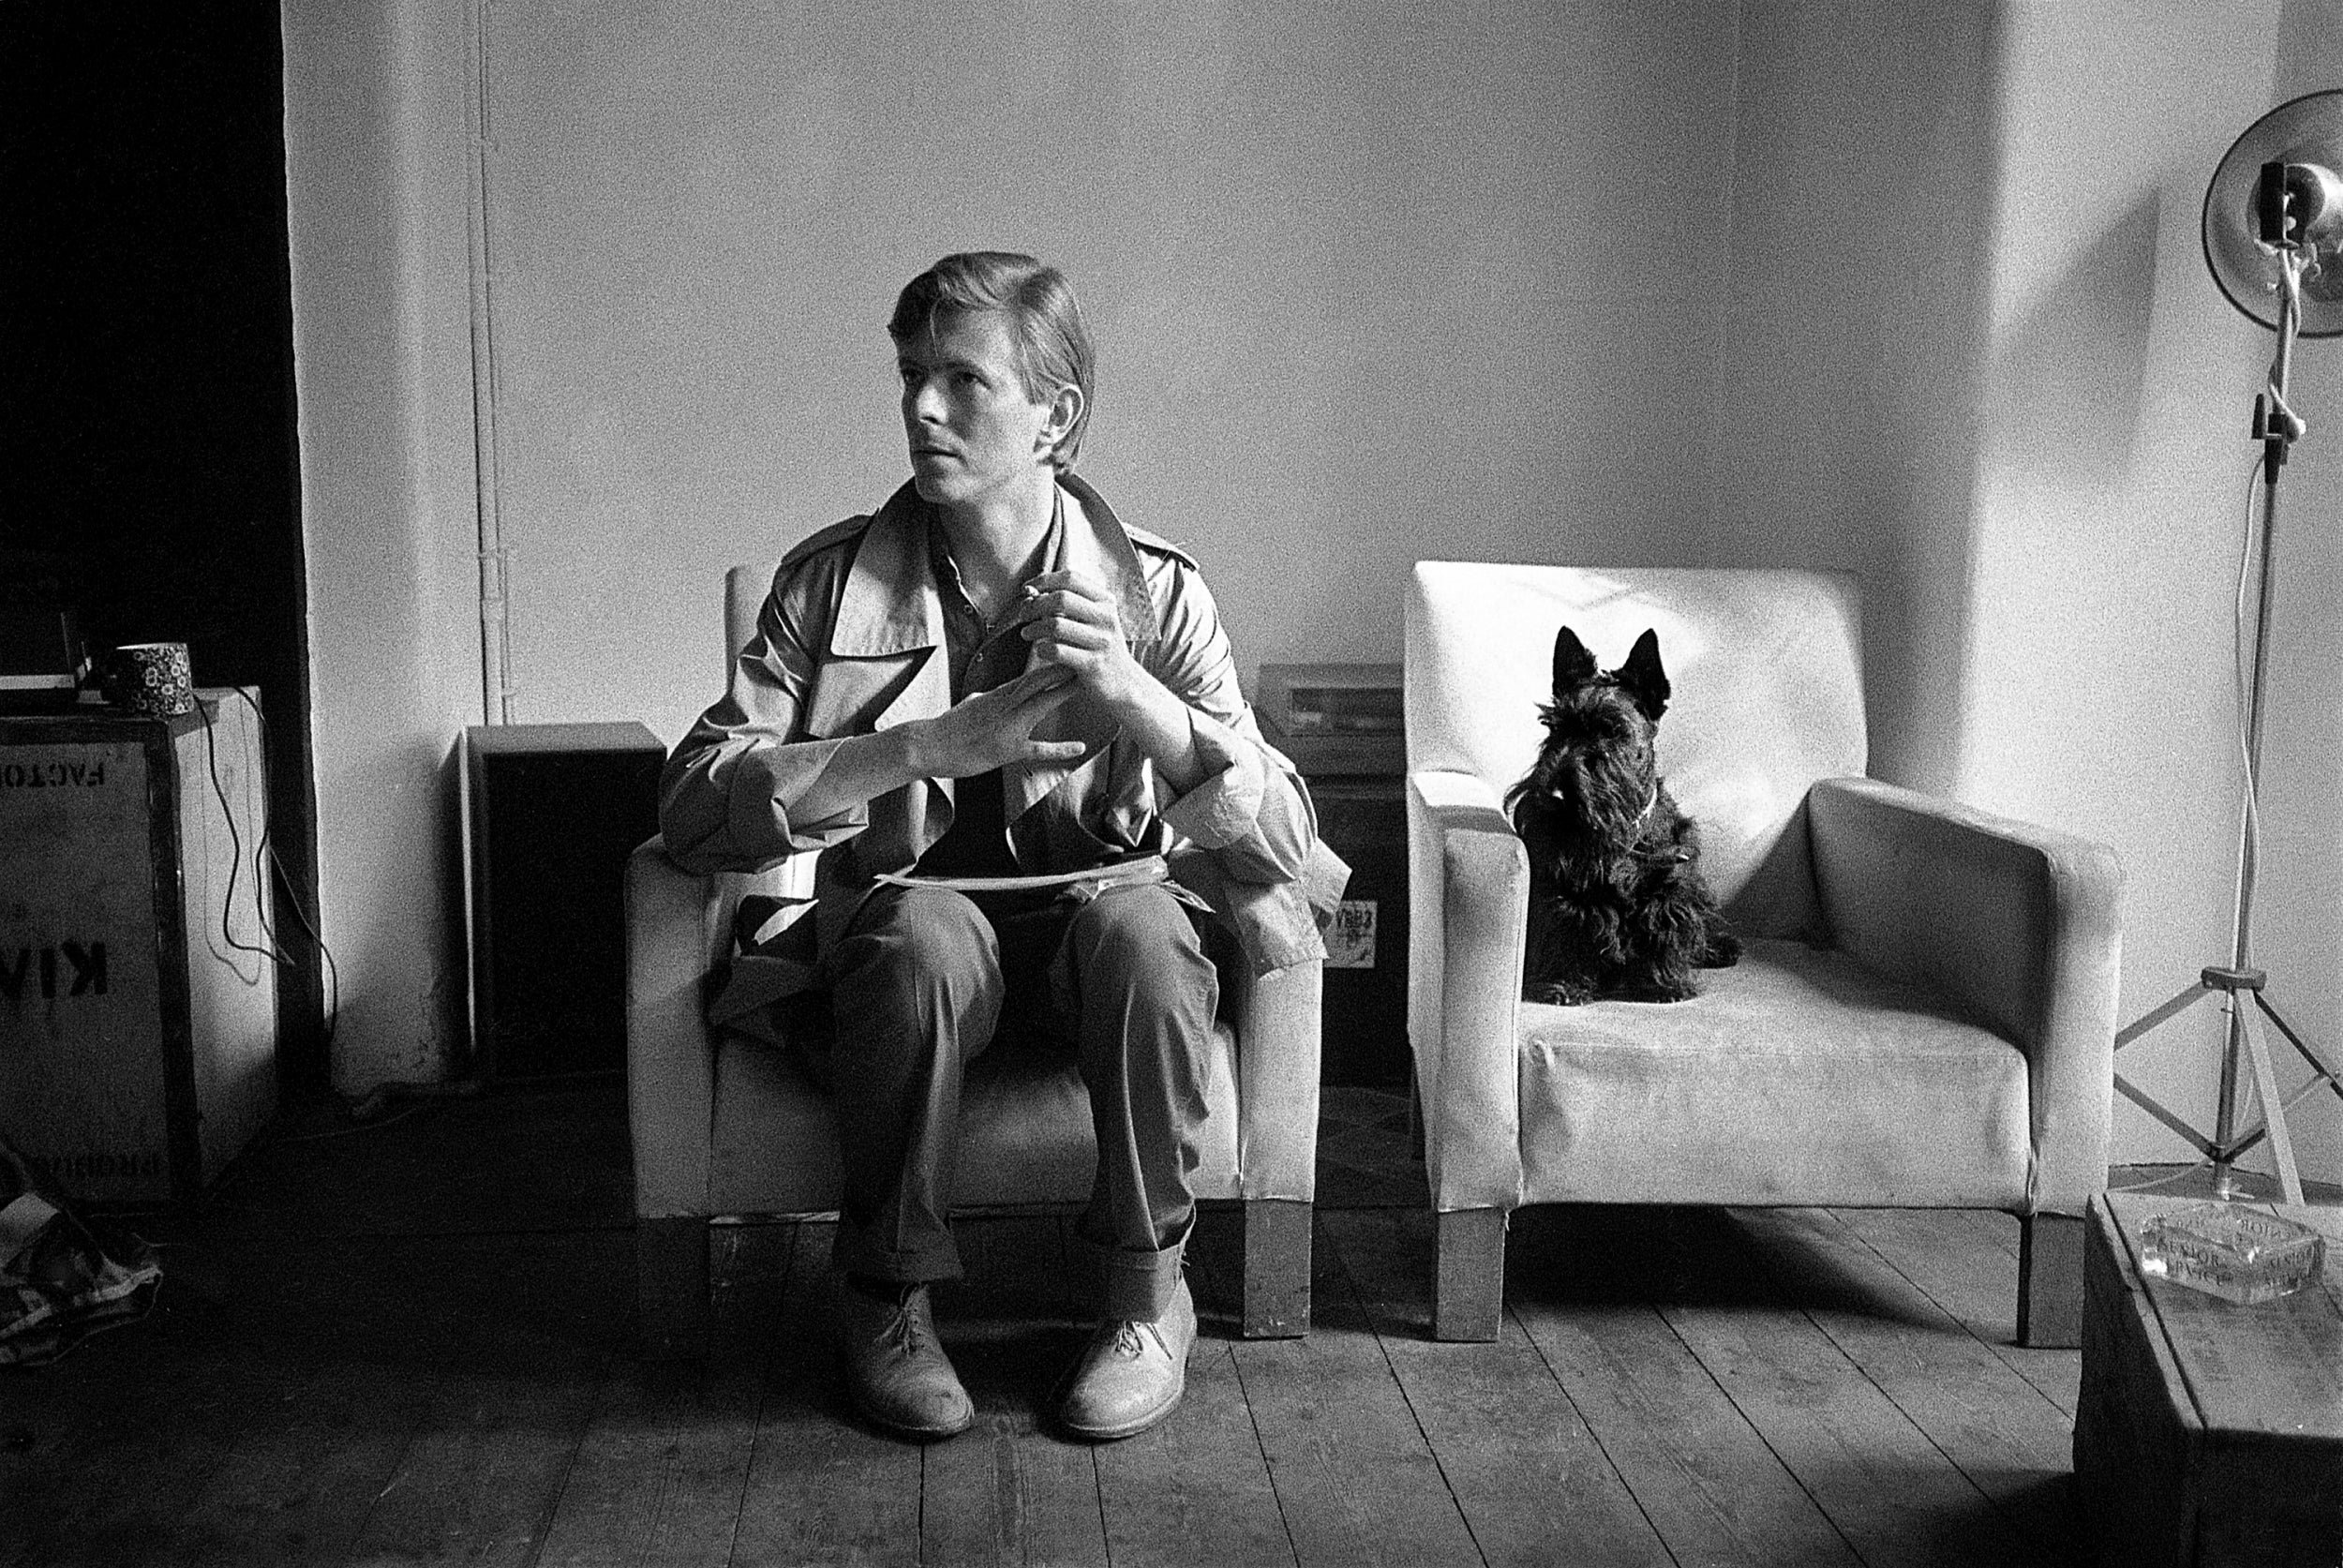 Art-for-Cure-Credit-Seated-Bowie-with-Dog-by-Keith-Duffy-courtesy-of-The-Duffy-Archive-to-exhibit-at-Art-for-Cure-2018-in-aid-of-Breast-Cancer-Now